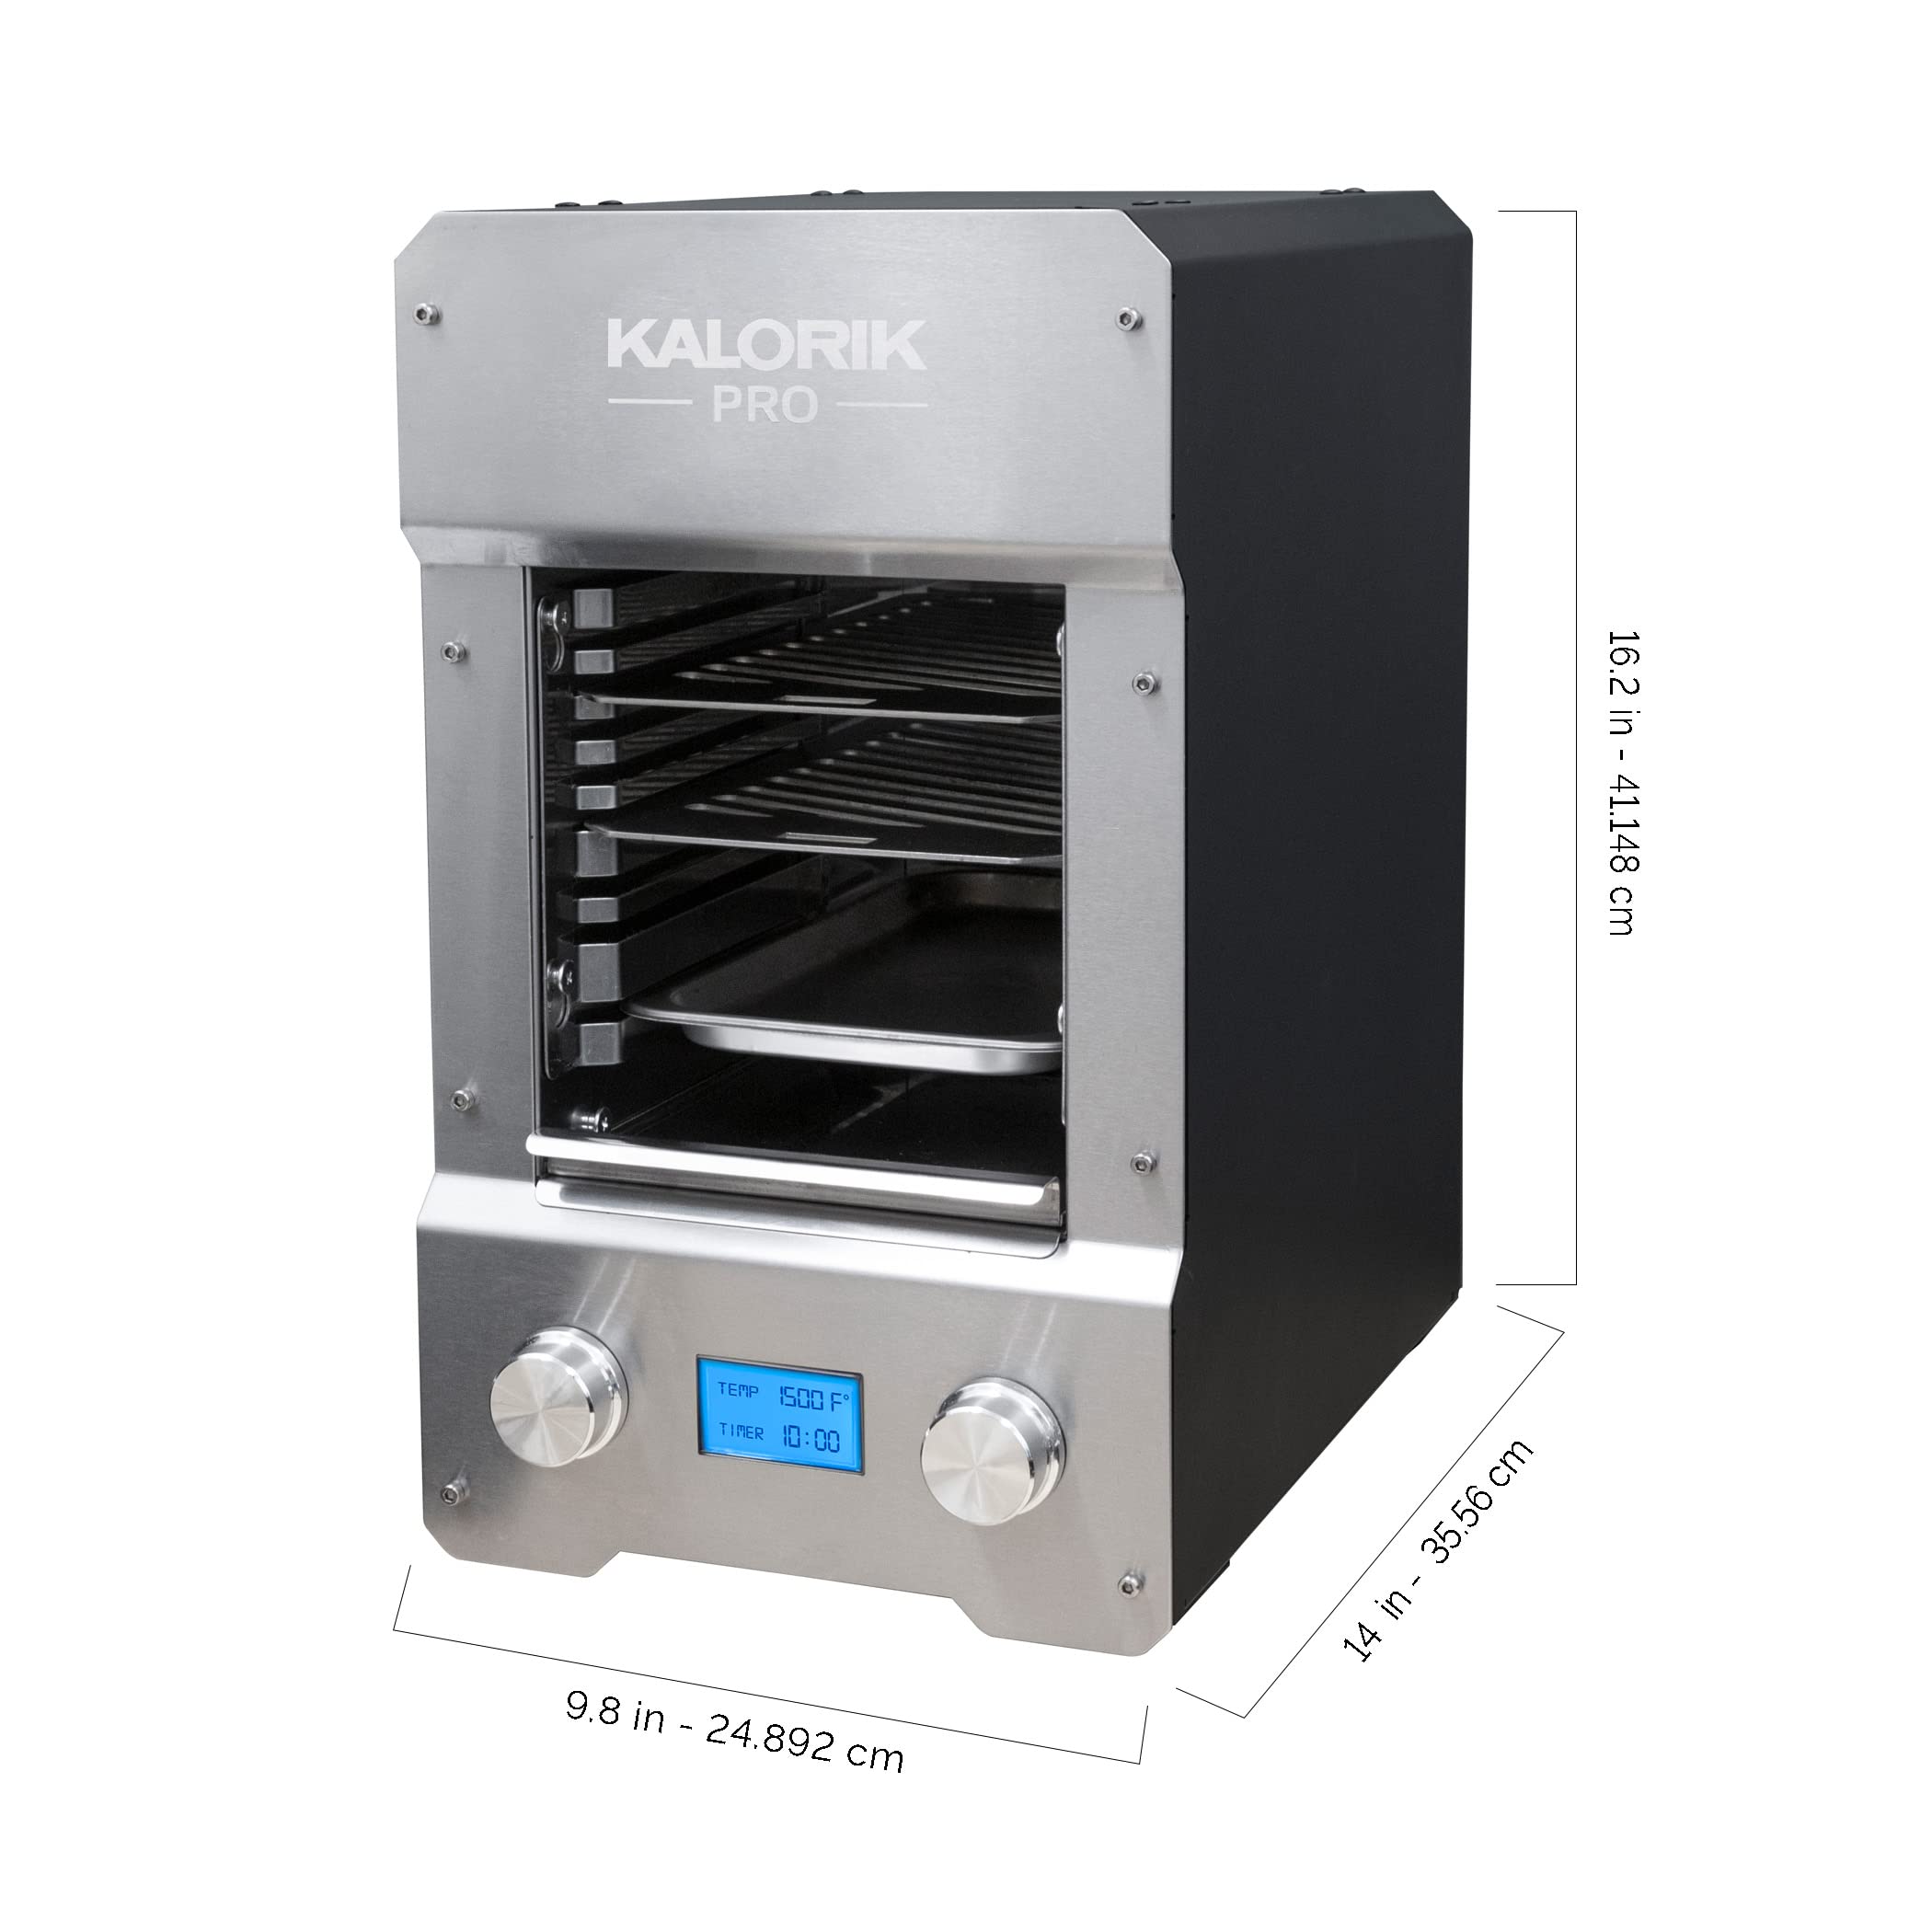 Kalorik® Professional Electric Smokeless Indoor Grill, Restaurant Quality 1500°F Searing, Premium Steak House Style with Perfect Caramelization, Digital LCD Display, Time & Temperature Control, 6 Accessories, 1600W, Easy Clean, Stainless Steel